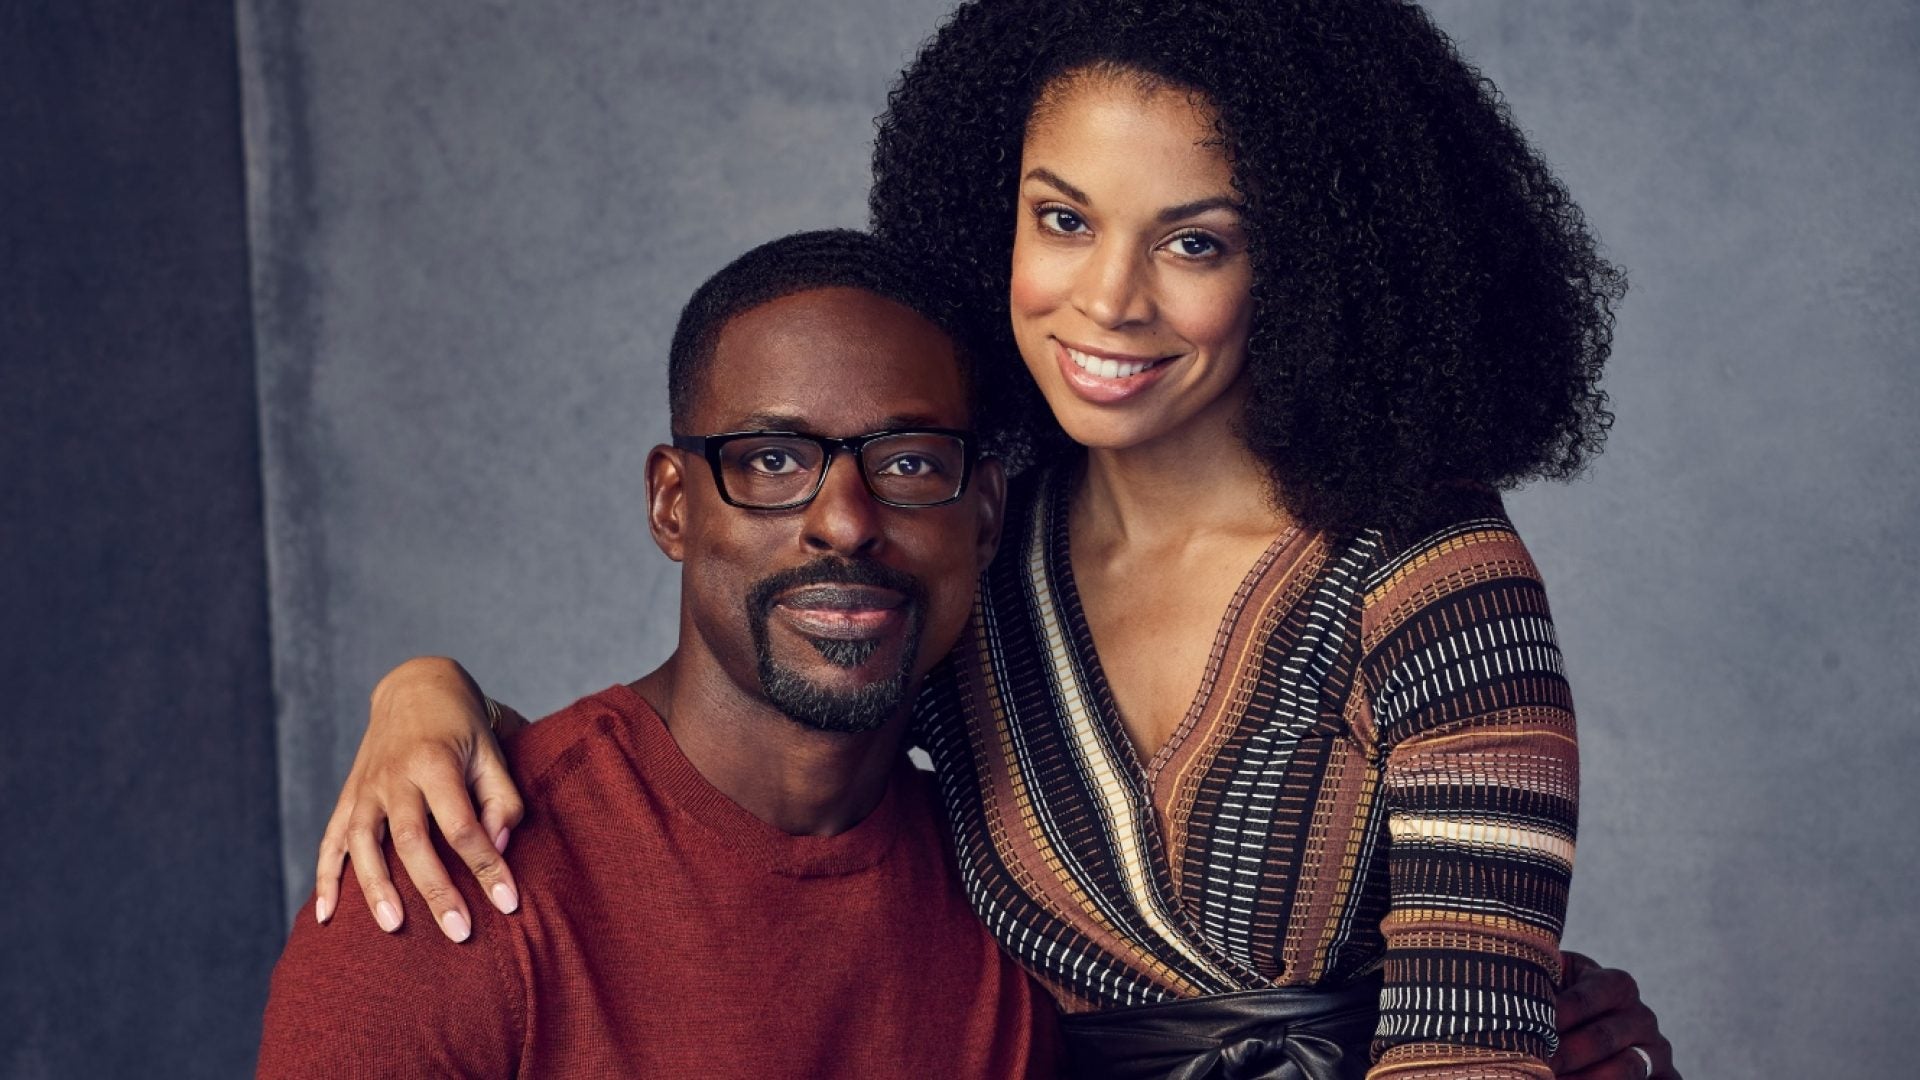 5 Love Lessons We Can Learn From Beth And Randall On 'This Is Us'